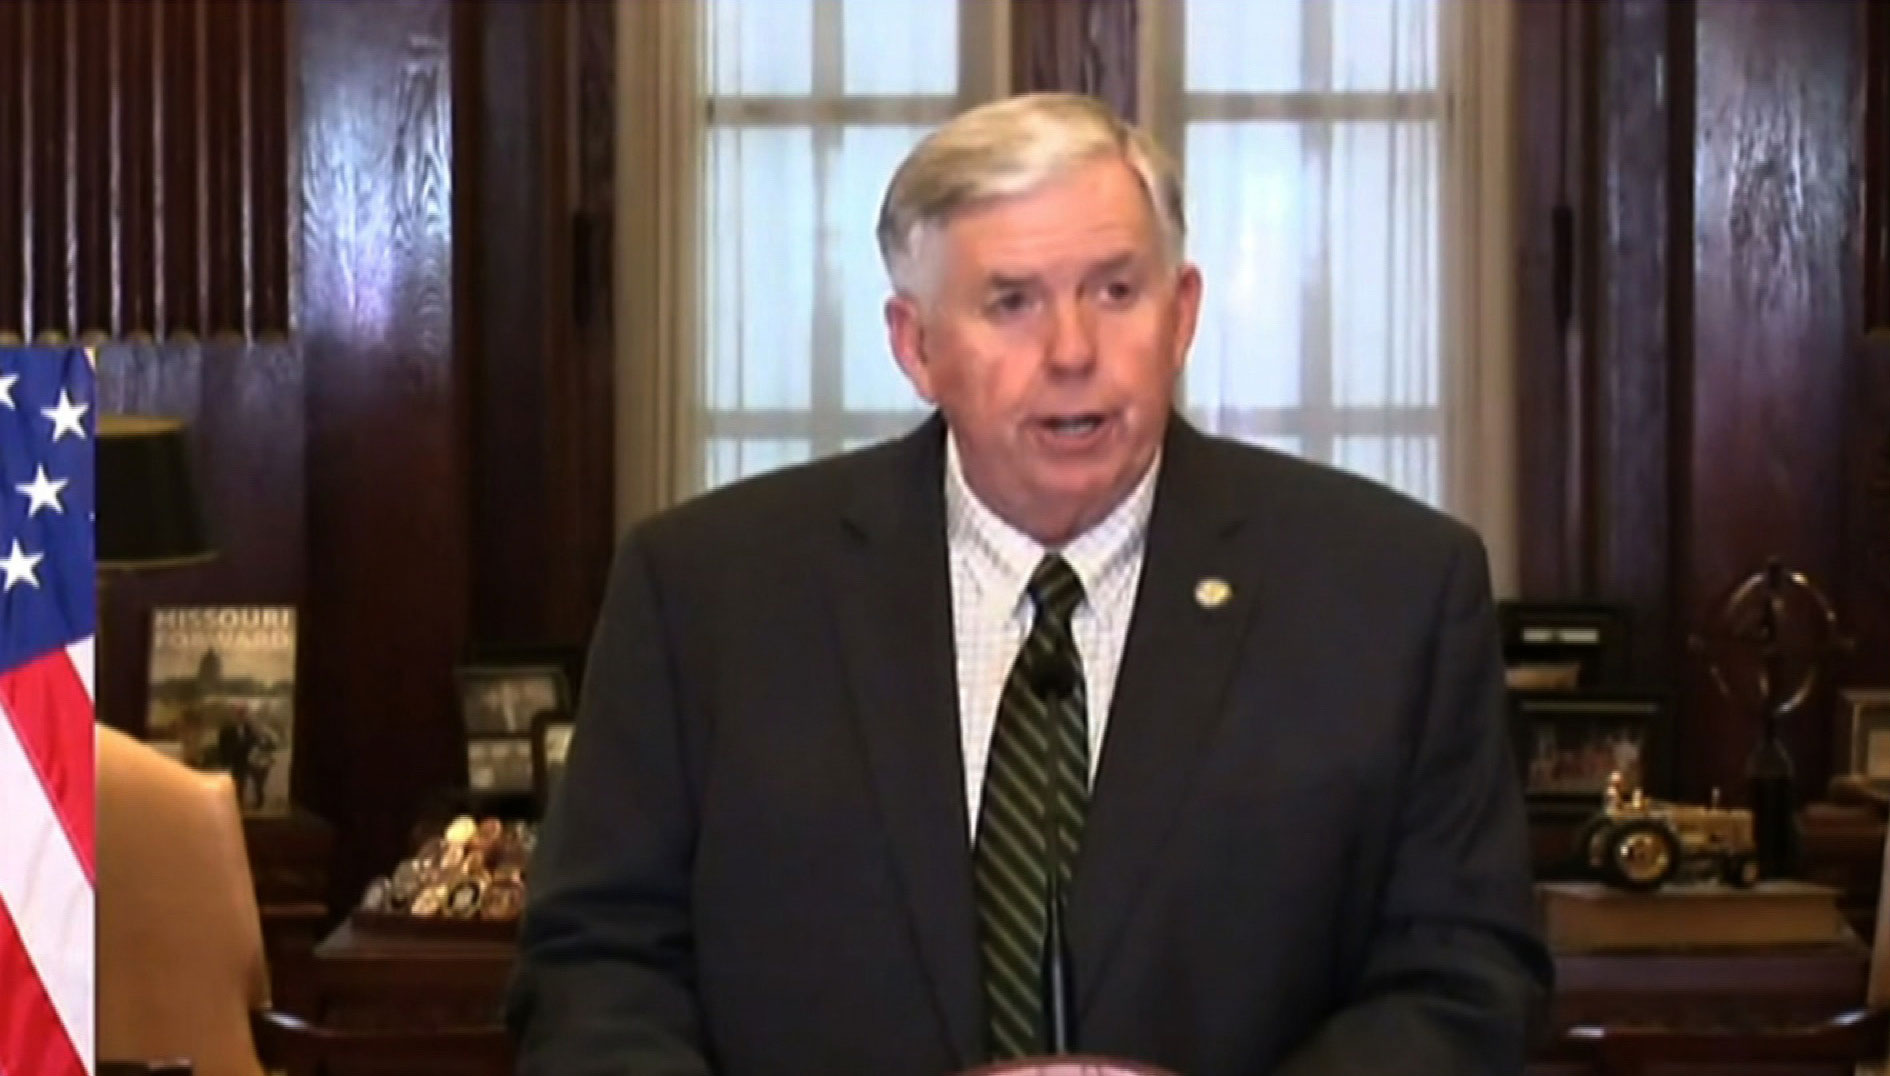 Missouri Gov. Mike Parson speaks during a media briefing in Jefferson City, Missouri, on May 4.